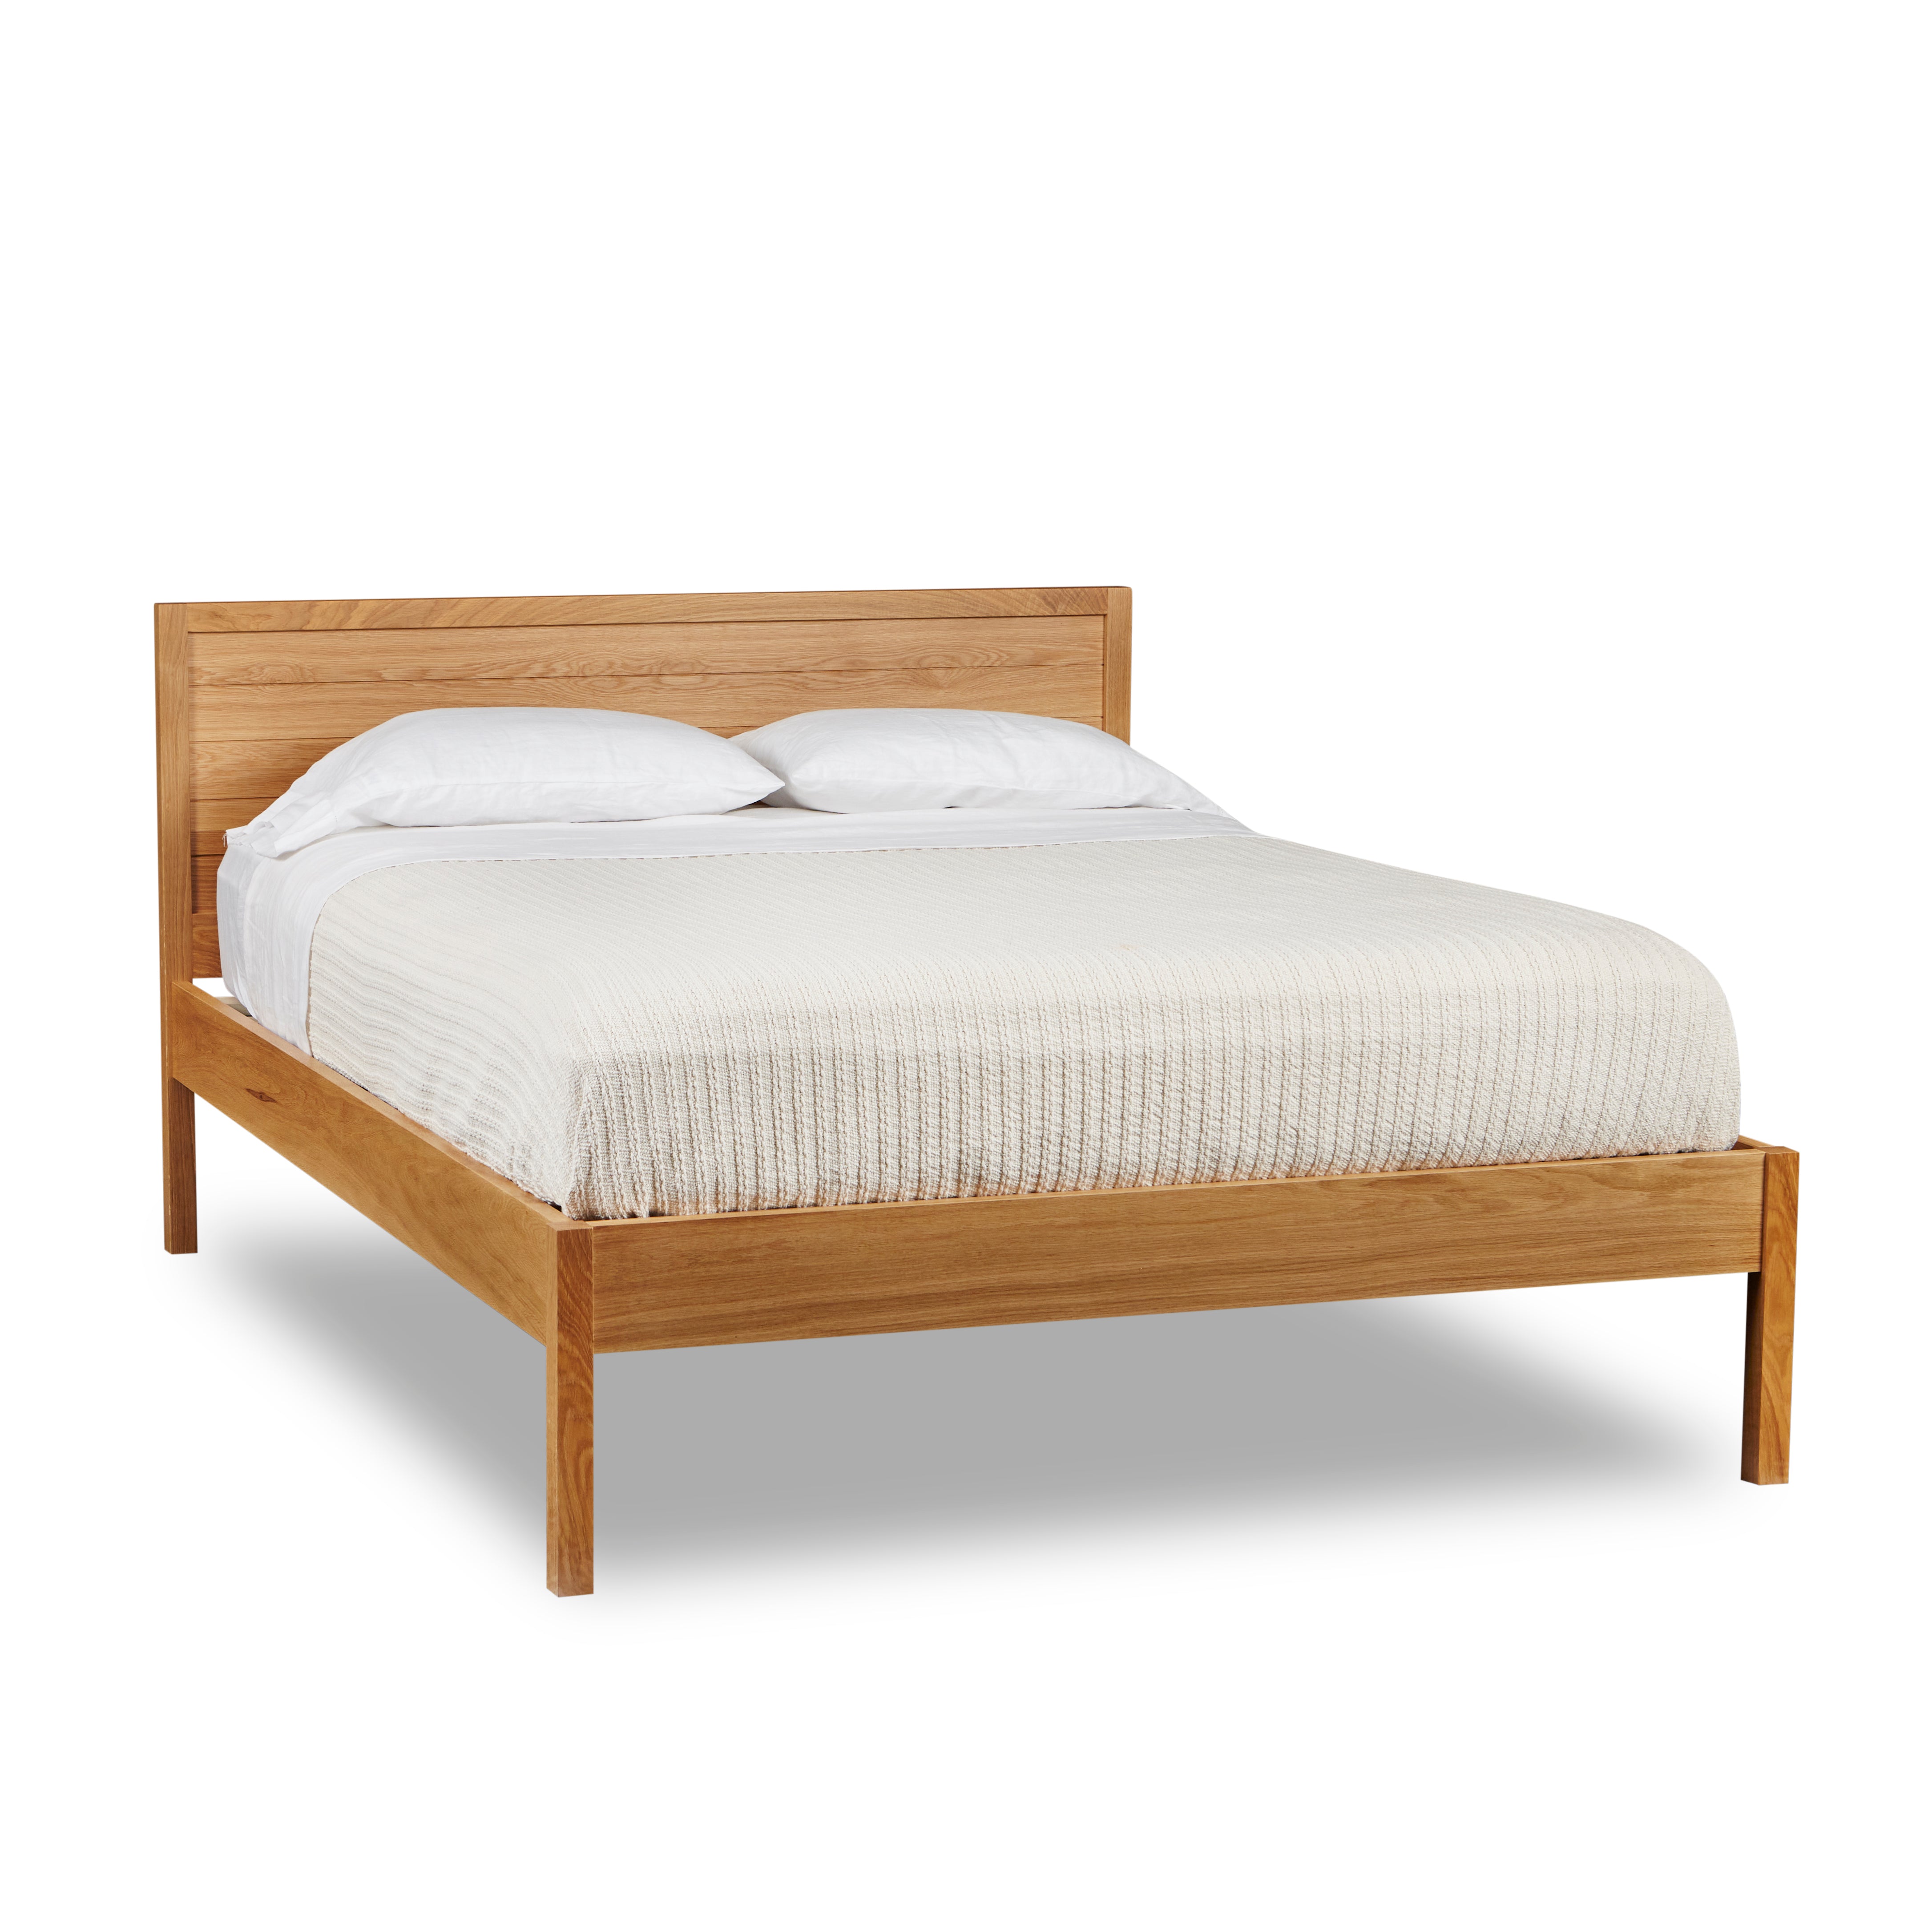 Solid white oak Shiplap bed with square legs, from Maine's Chilton Furniture Co.